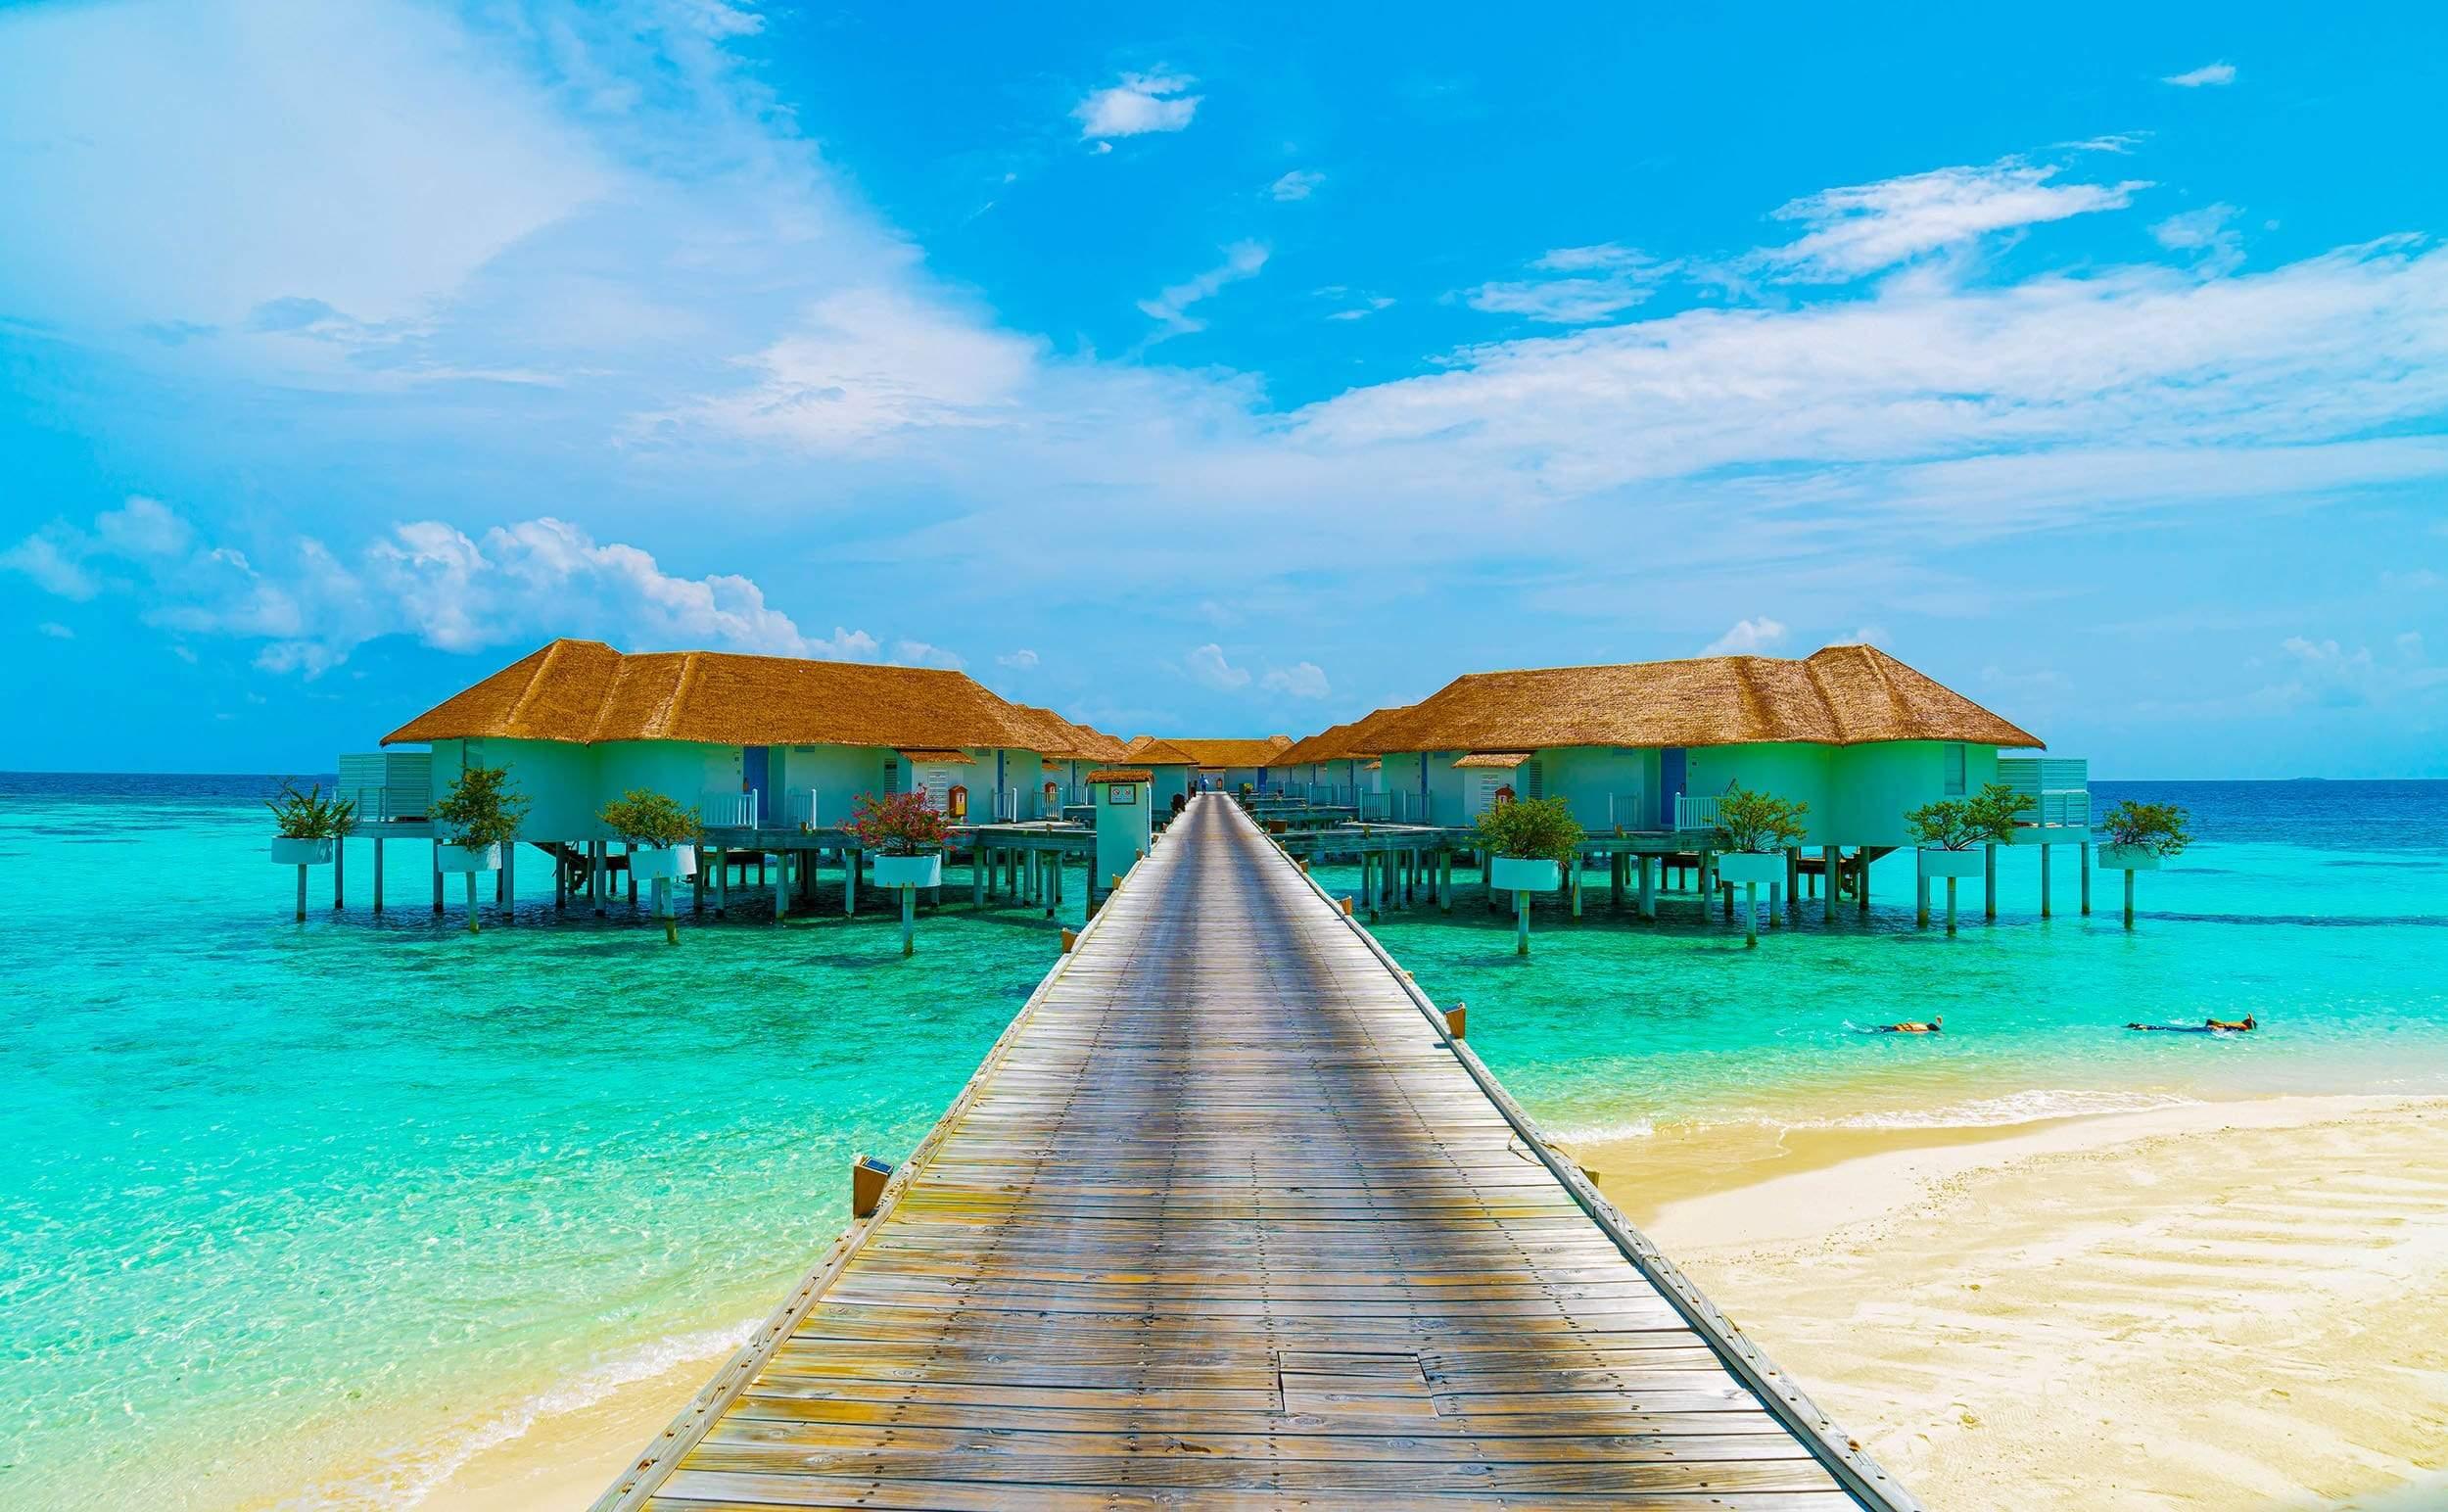 Huts over water with walkway and emerald water